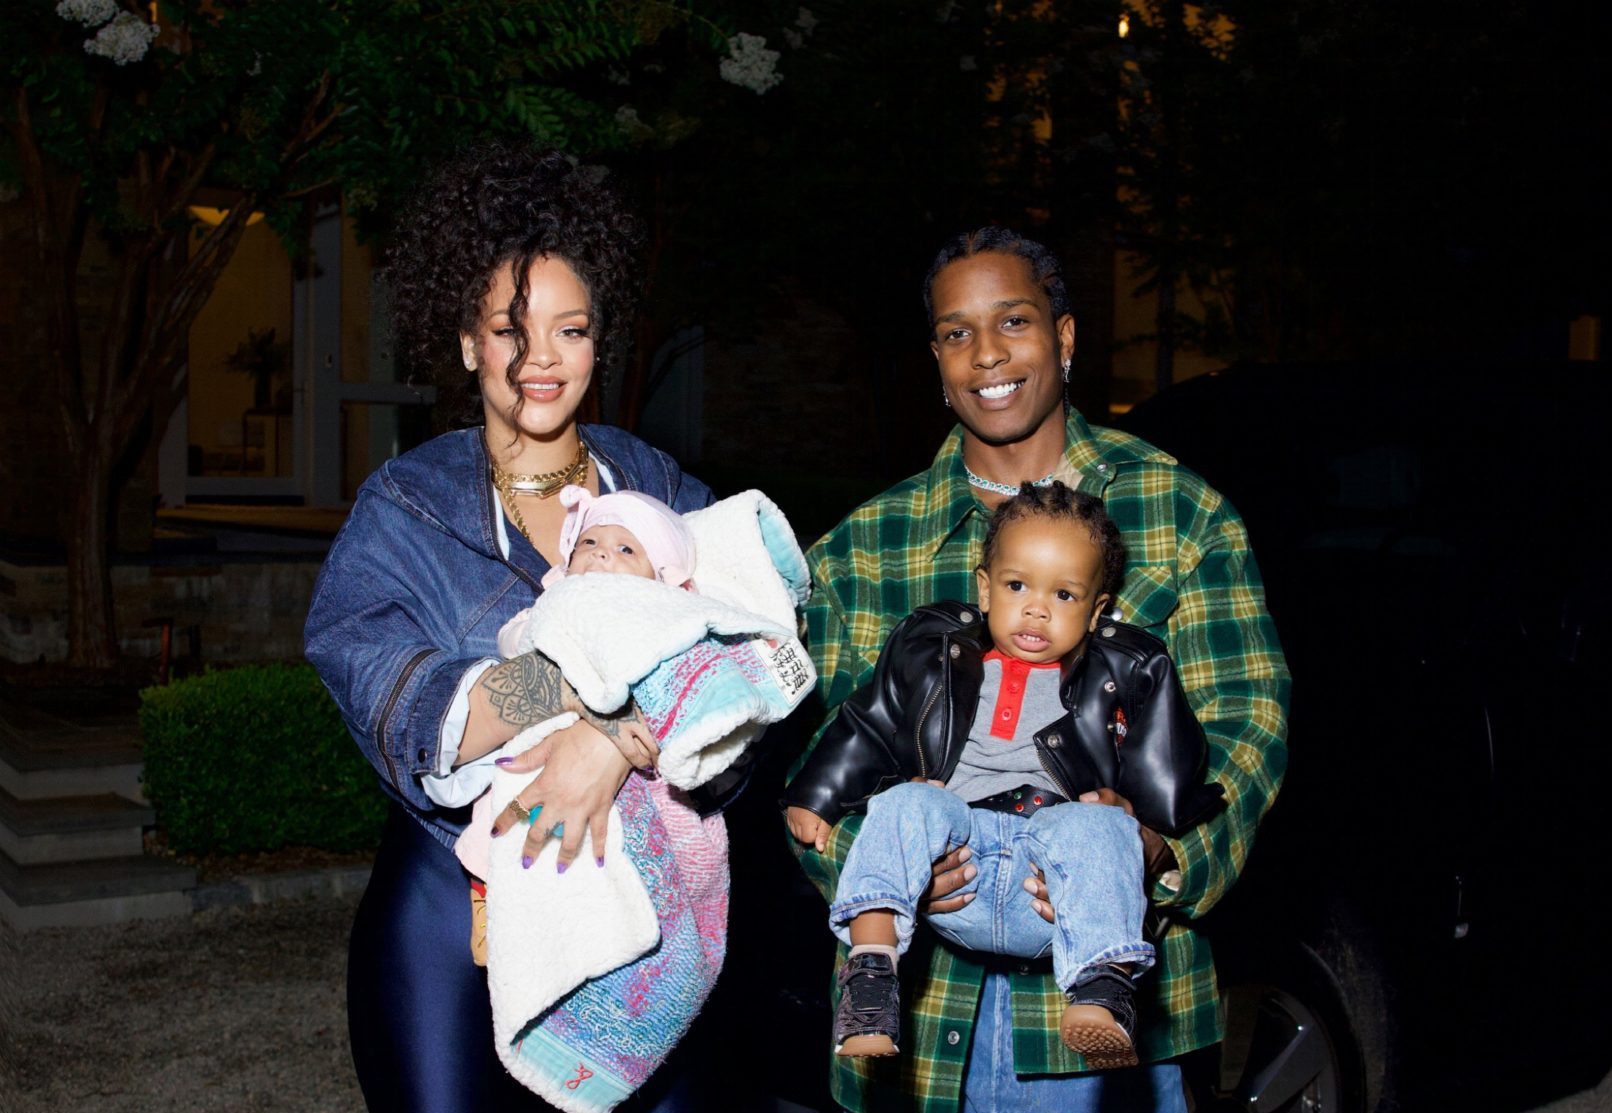 Baby Reveal! Rihanna & A$AP Rocky Pose In A Family Photoshoot With Their Two Sons (PHOTOS)